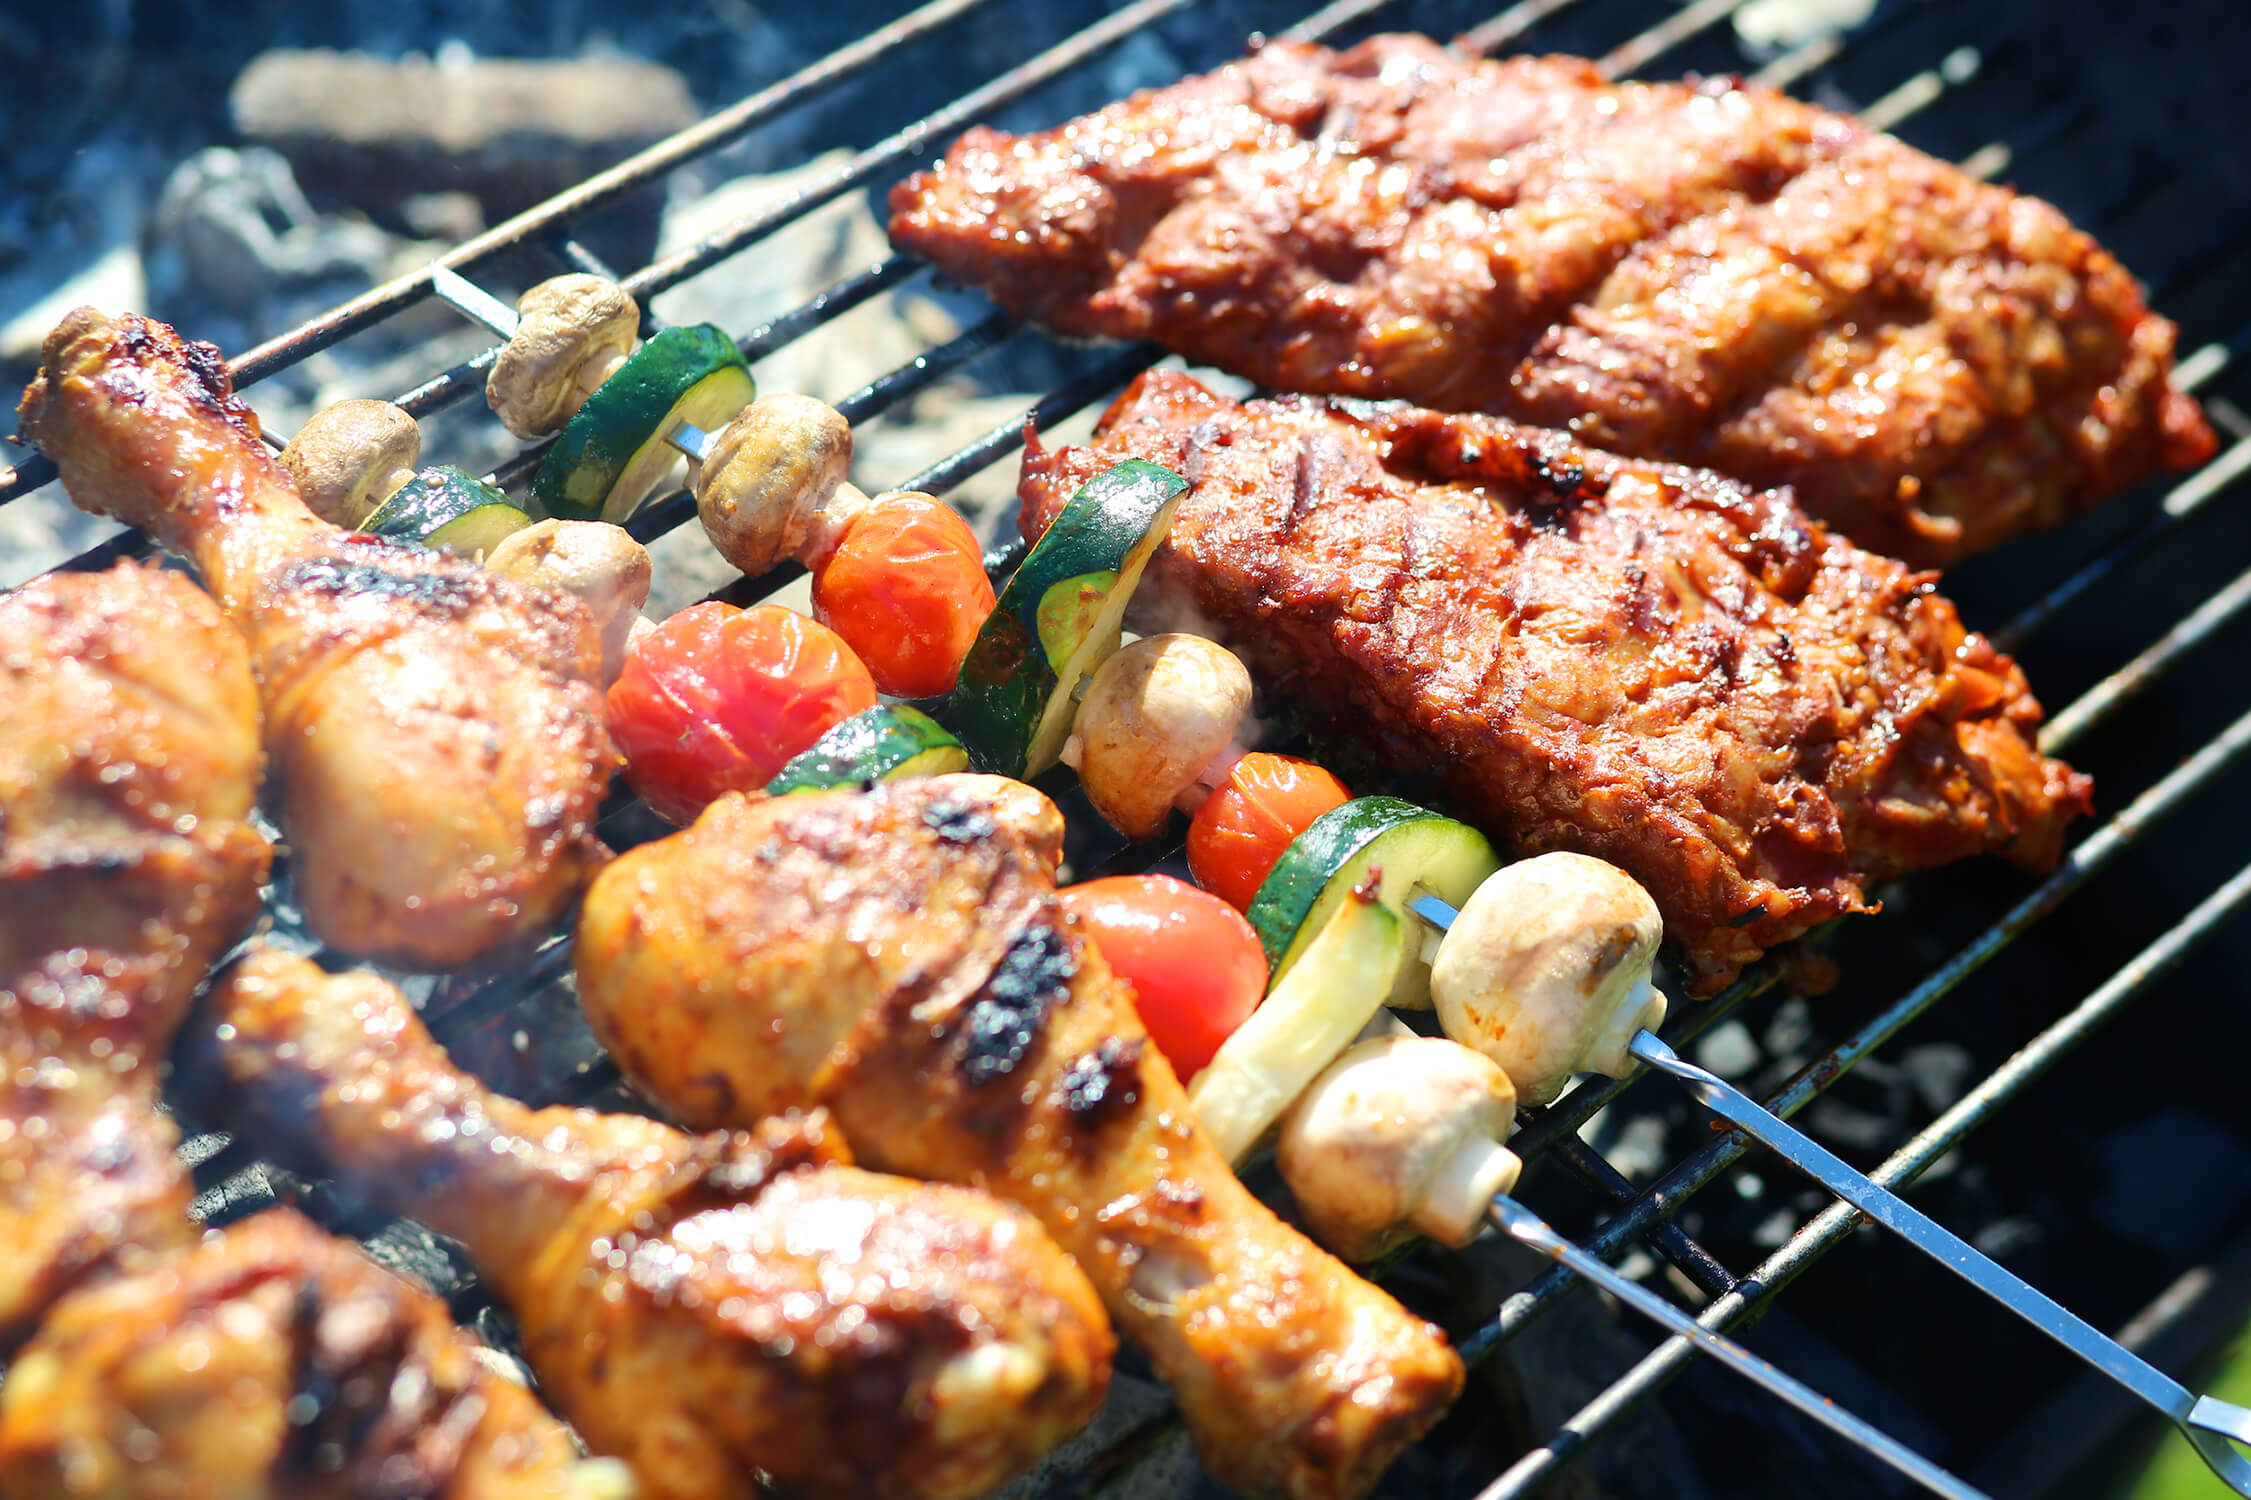 Food being grilled over charcoal